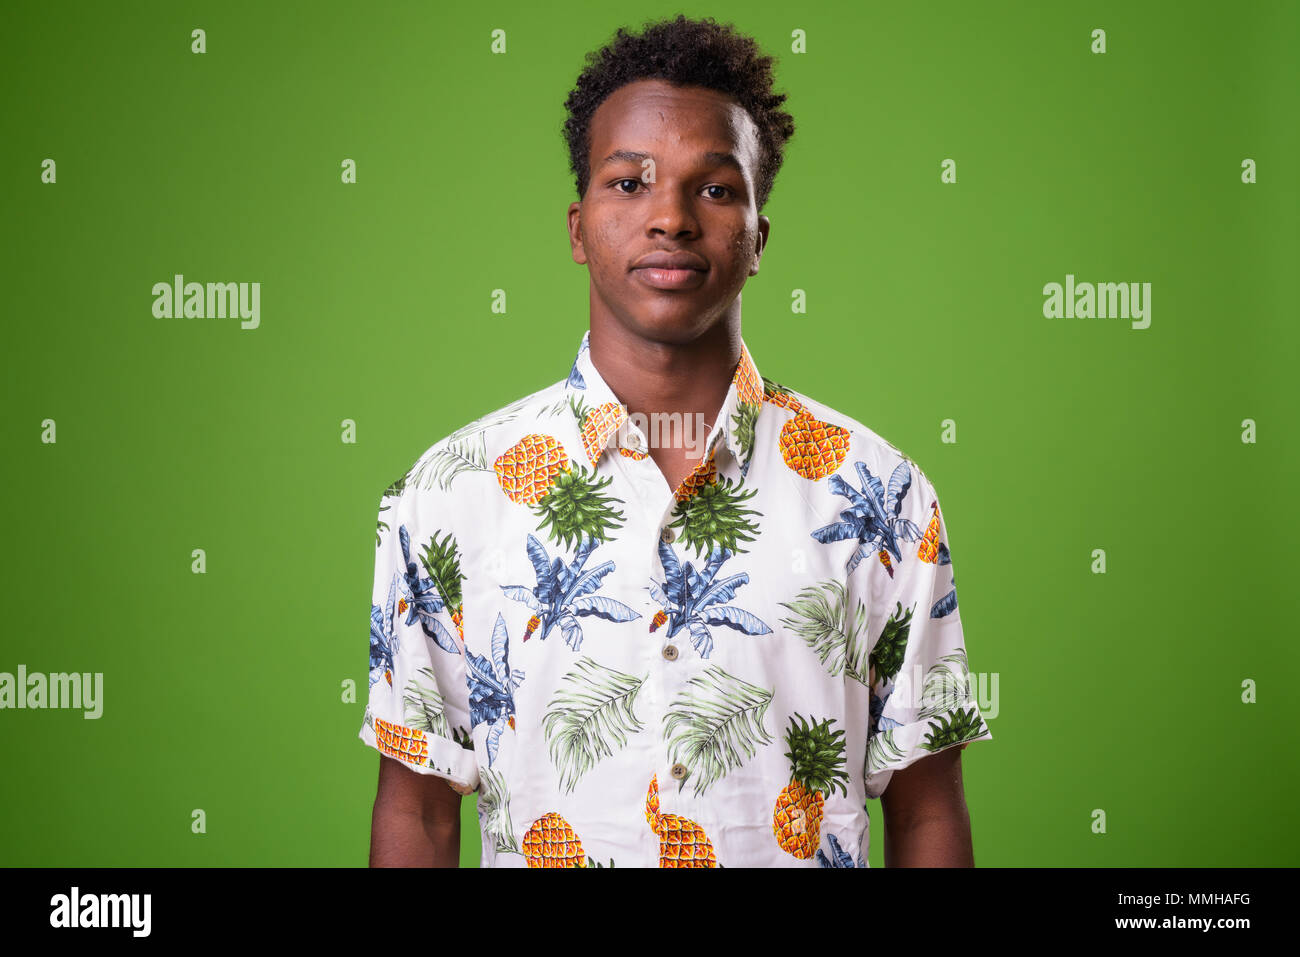 Young African tourist man ready for vacation against green backg Stock Photo